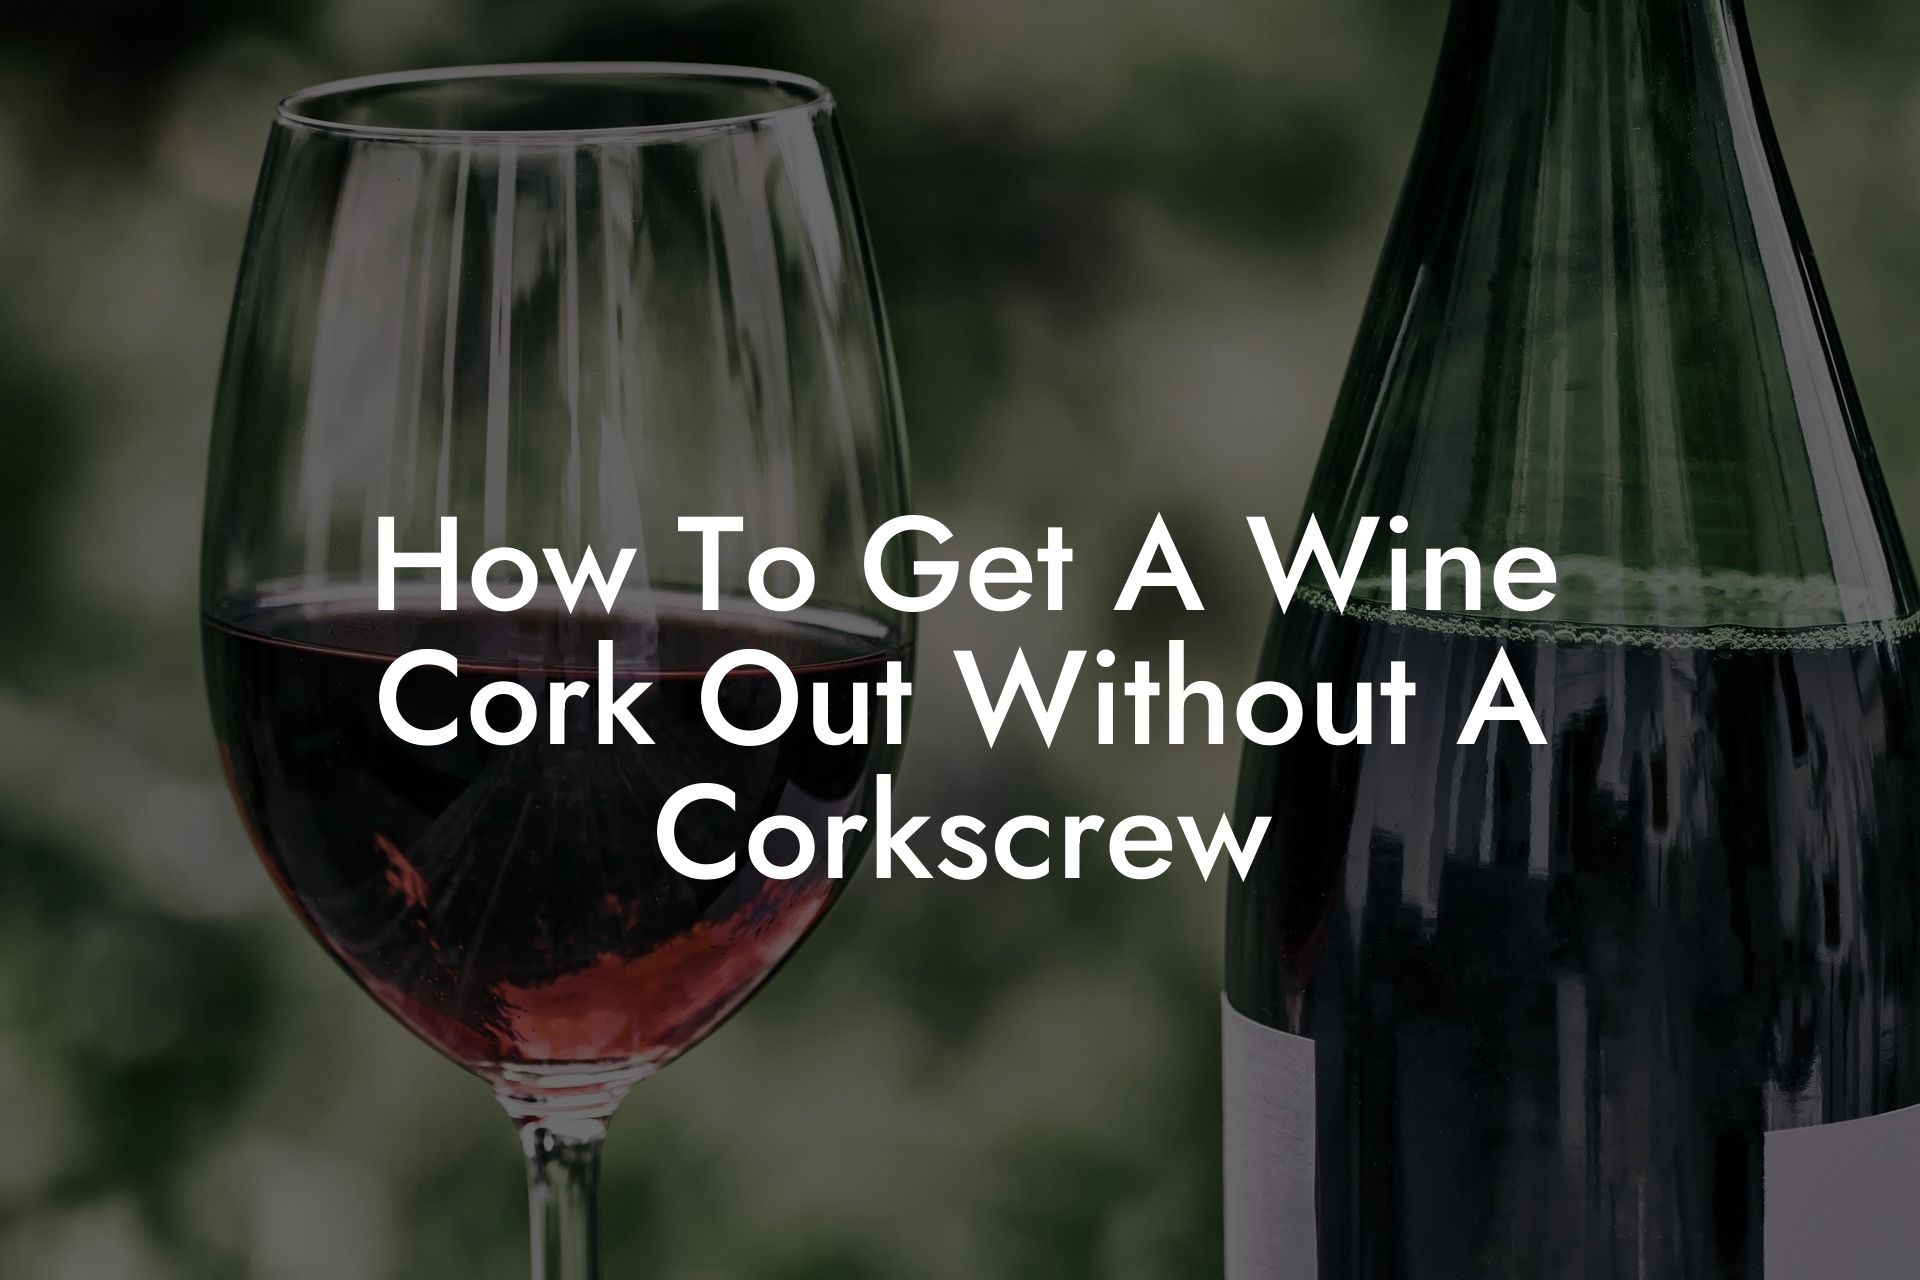 How To Get A Wine Cork Out Without A Corkscrew